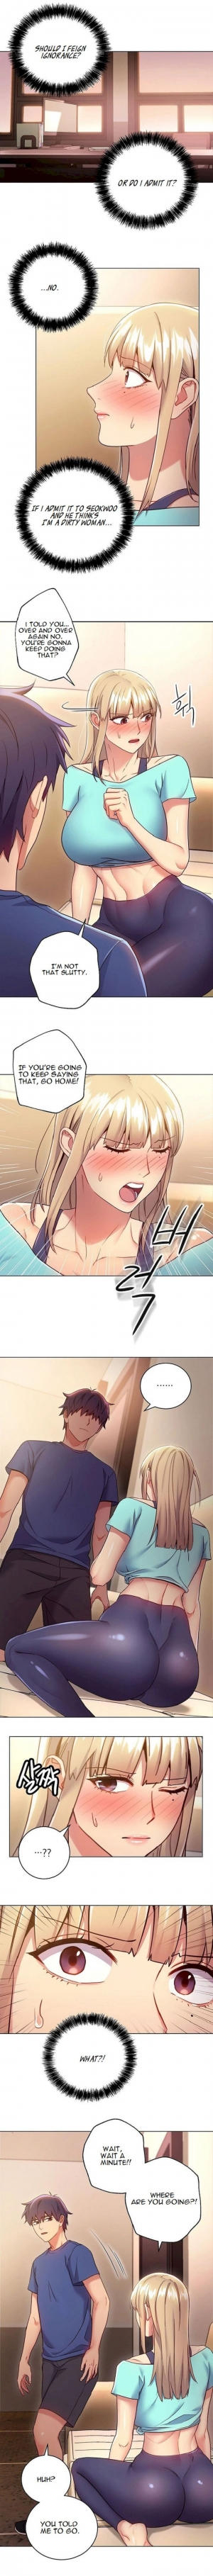  [Neck Pilllow] Stepmother Friends Ch.39/? [English] [Hentai Universe] NEW! 13/10/2020  - Page 166